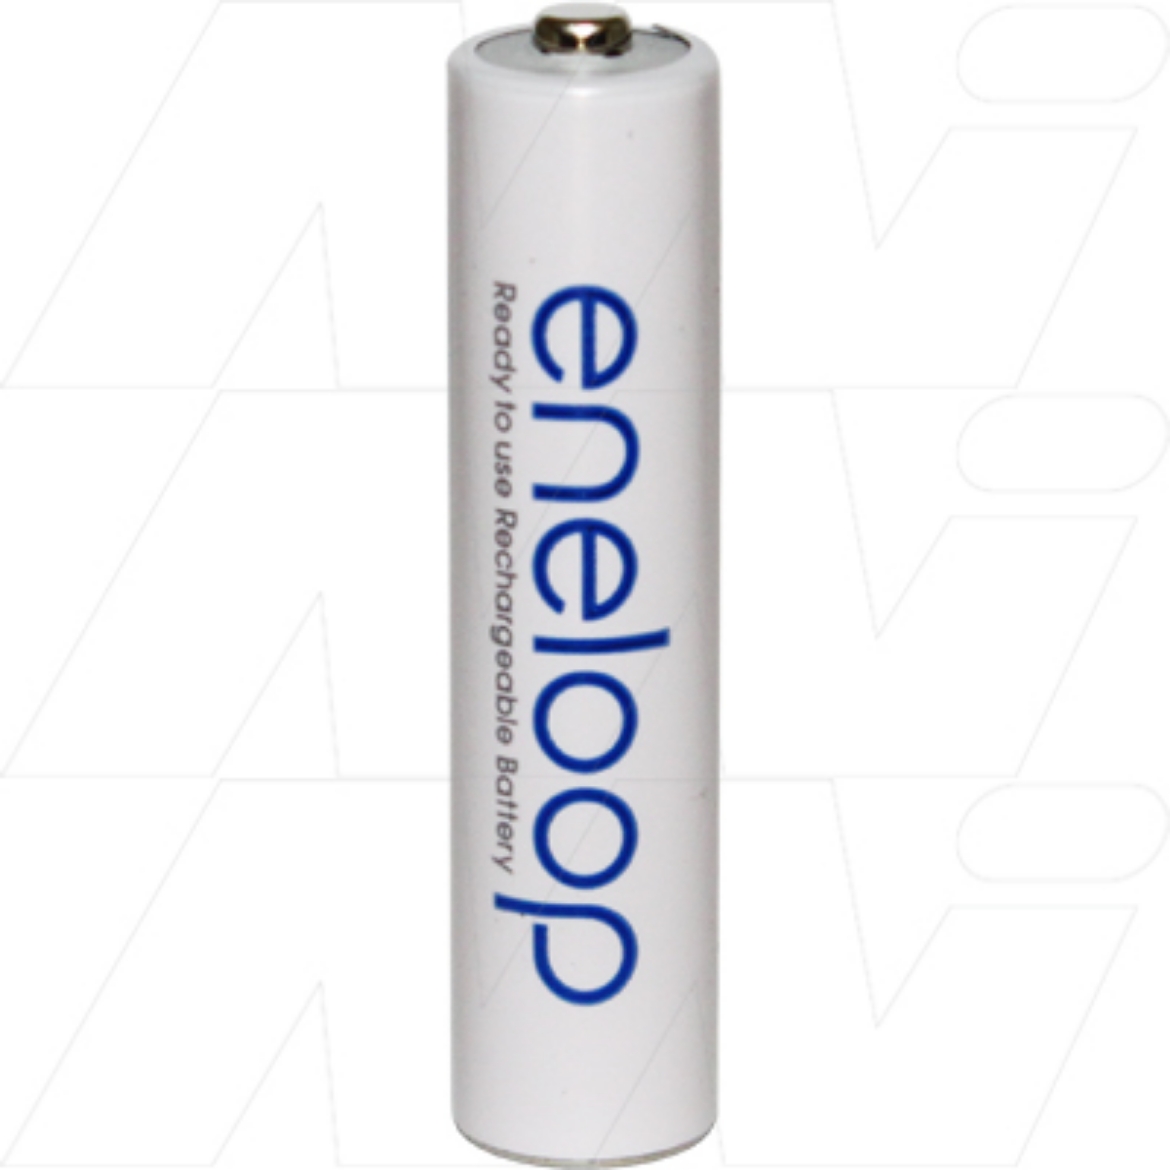 Picture of BK-4MCCE PANASONIC ENELOOP NiMh AAA 1.2V 800mAh BATTERY **BULK PACKED** -- ( READY TO USE)